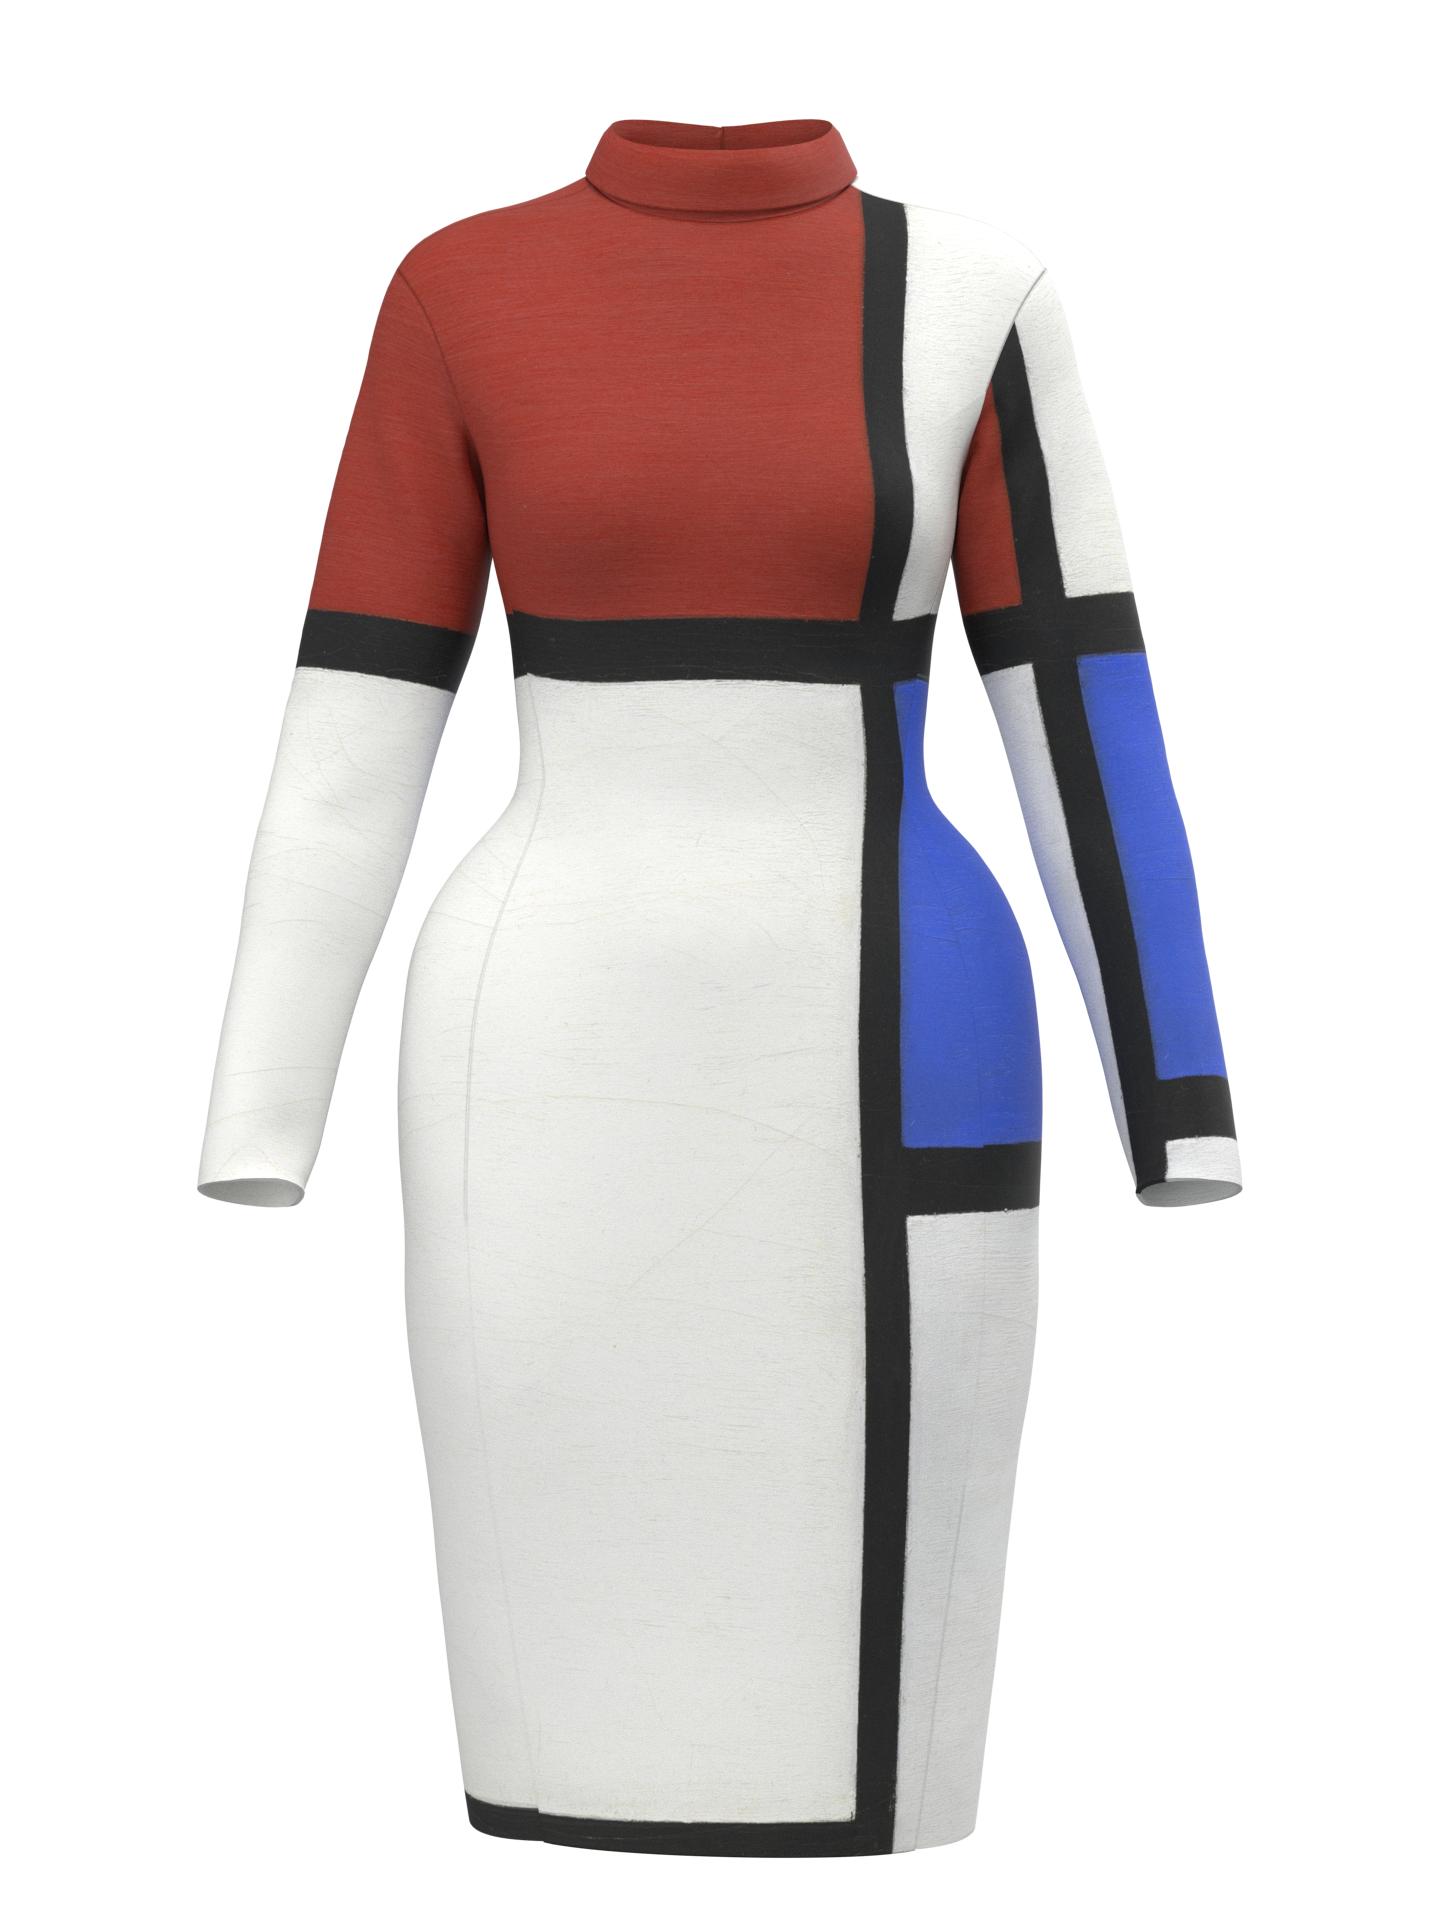 Space Dress- Composition No. II with Red and Blue by DRESSX PIET MONDRIAN